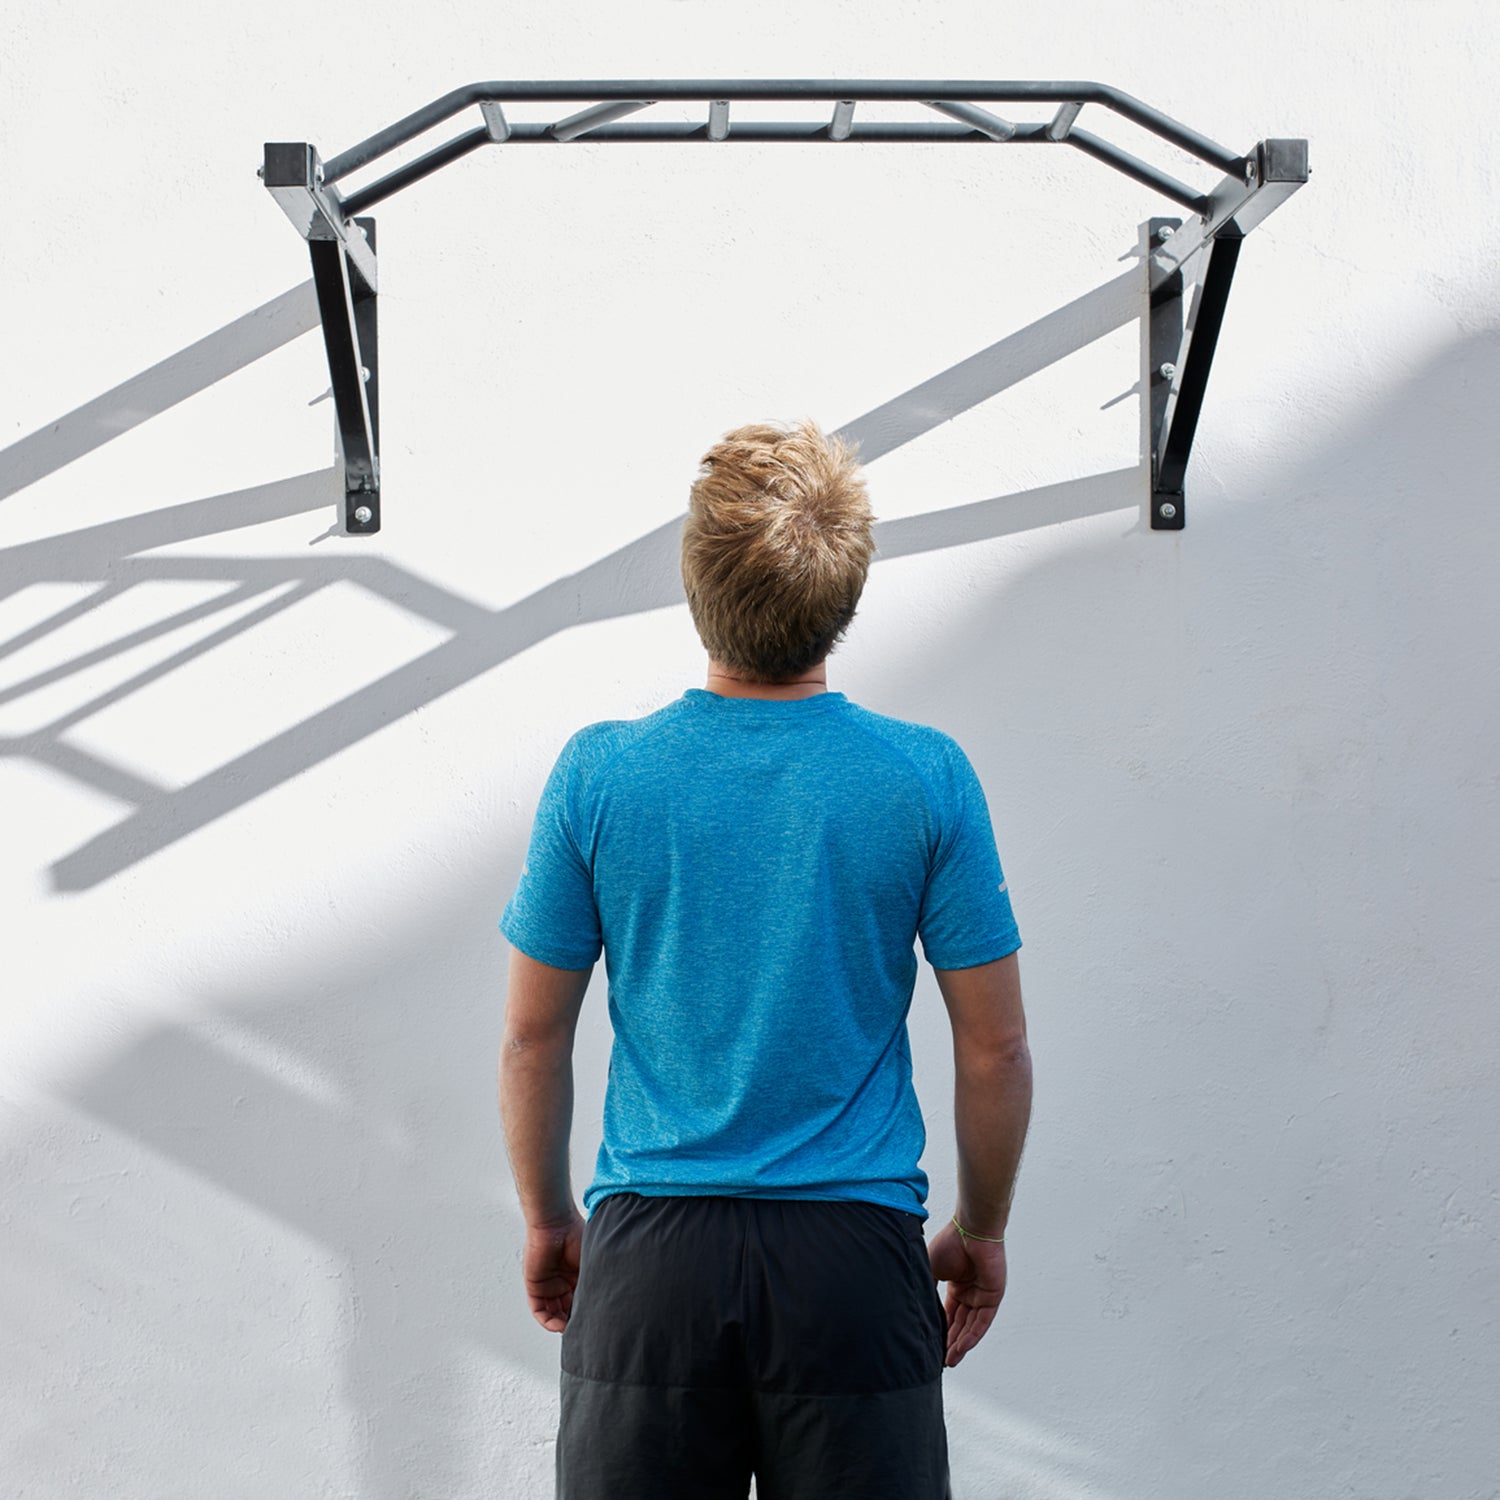 Pull Up Bar Workout For Beginners